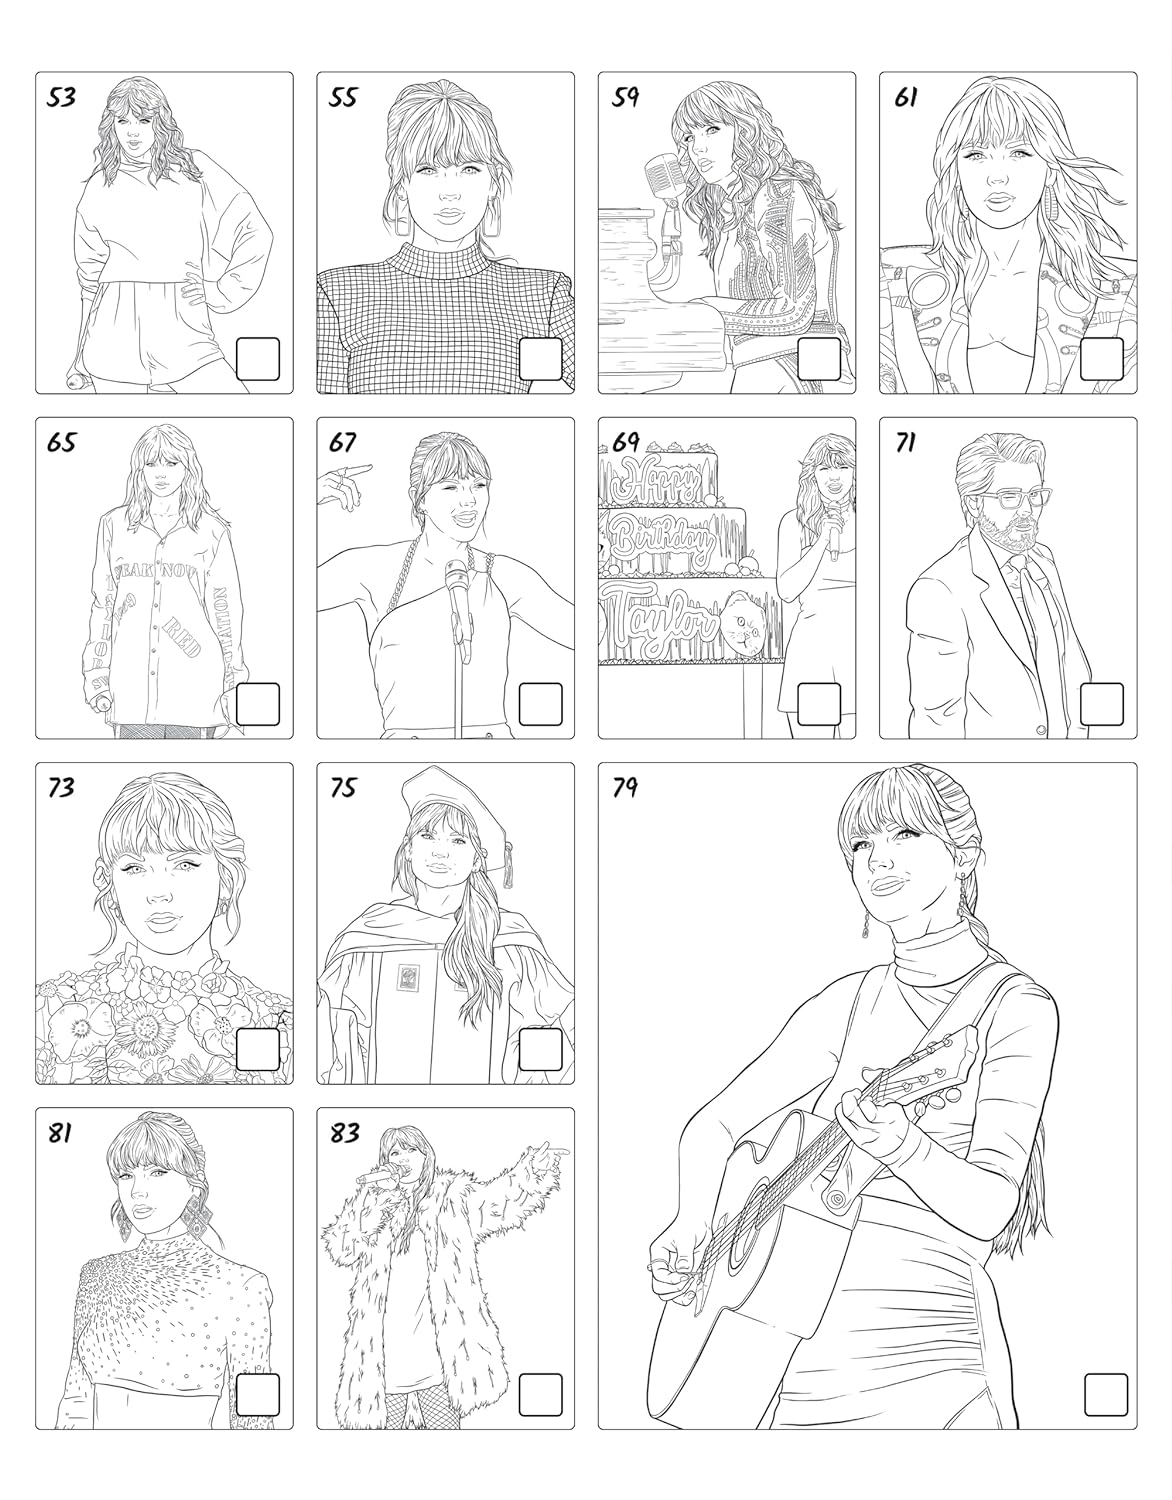 Super Fan-Tastic Taylor Swift Coloring & Activity Book: 30+ Coloring Pages, Photo Gallery, Word Searches, Mazes, & Fun Facts [Book]